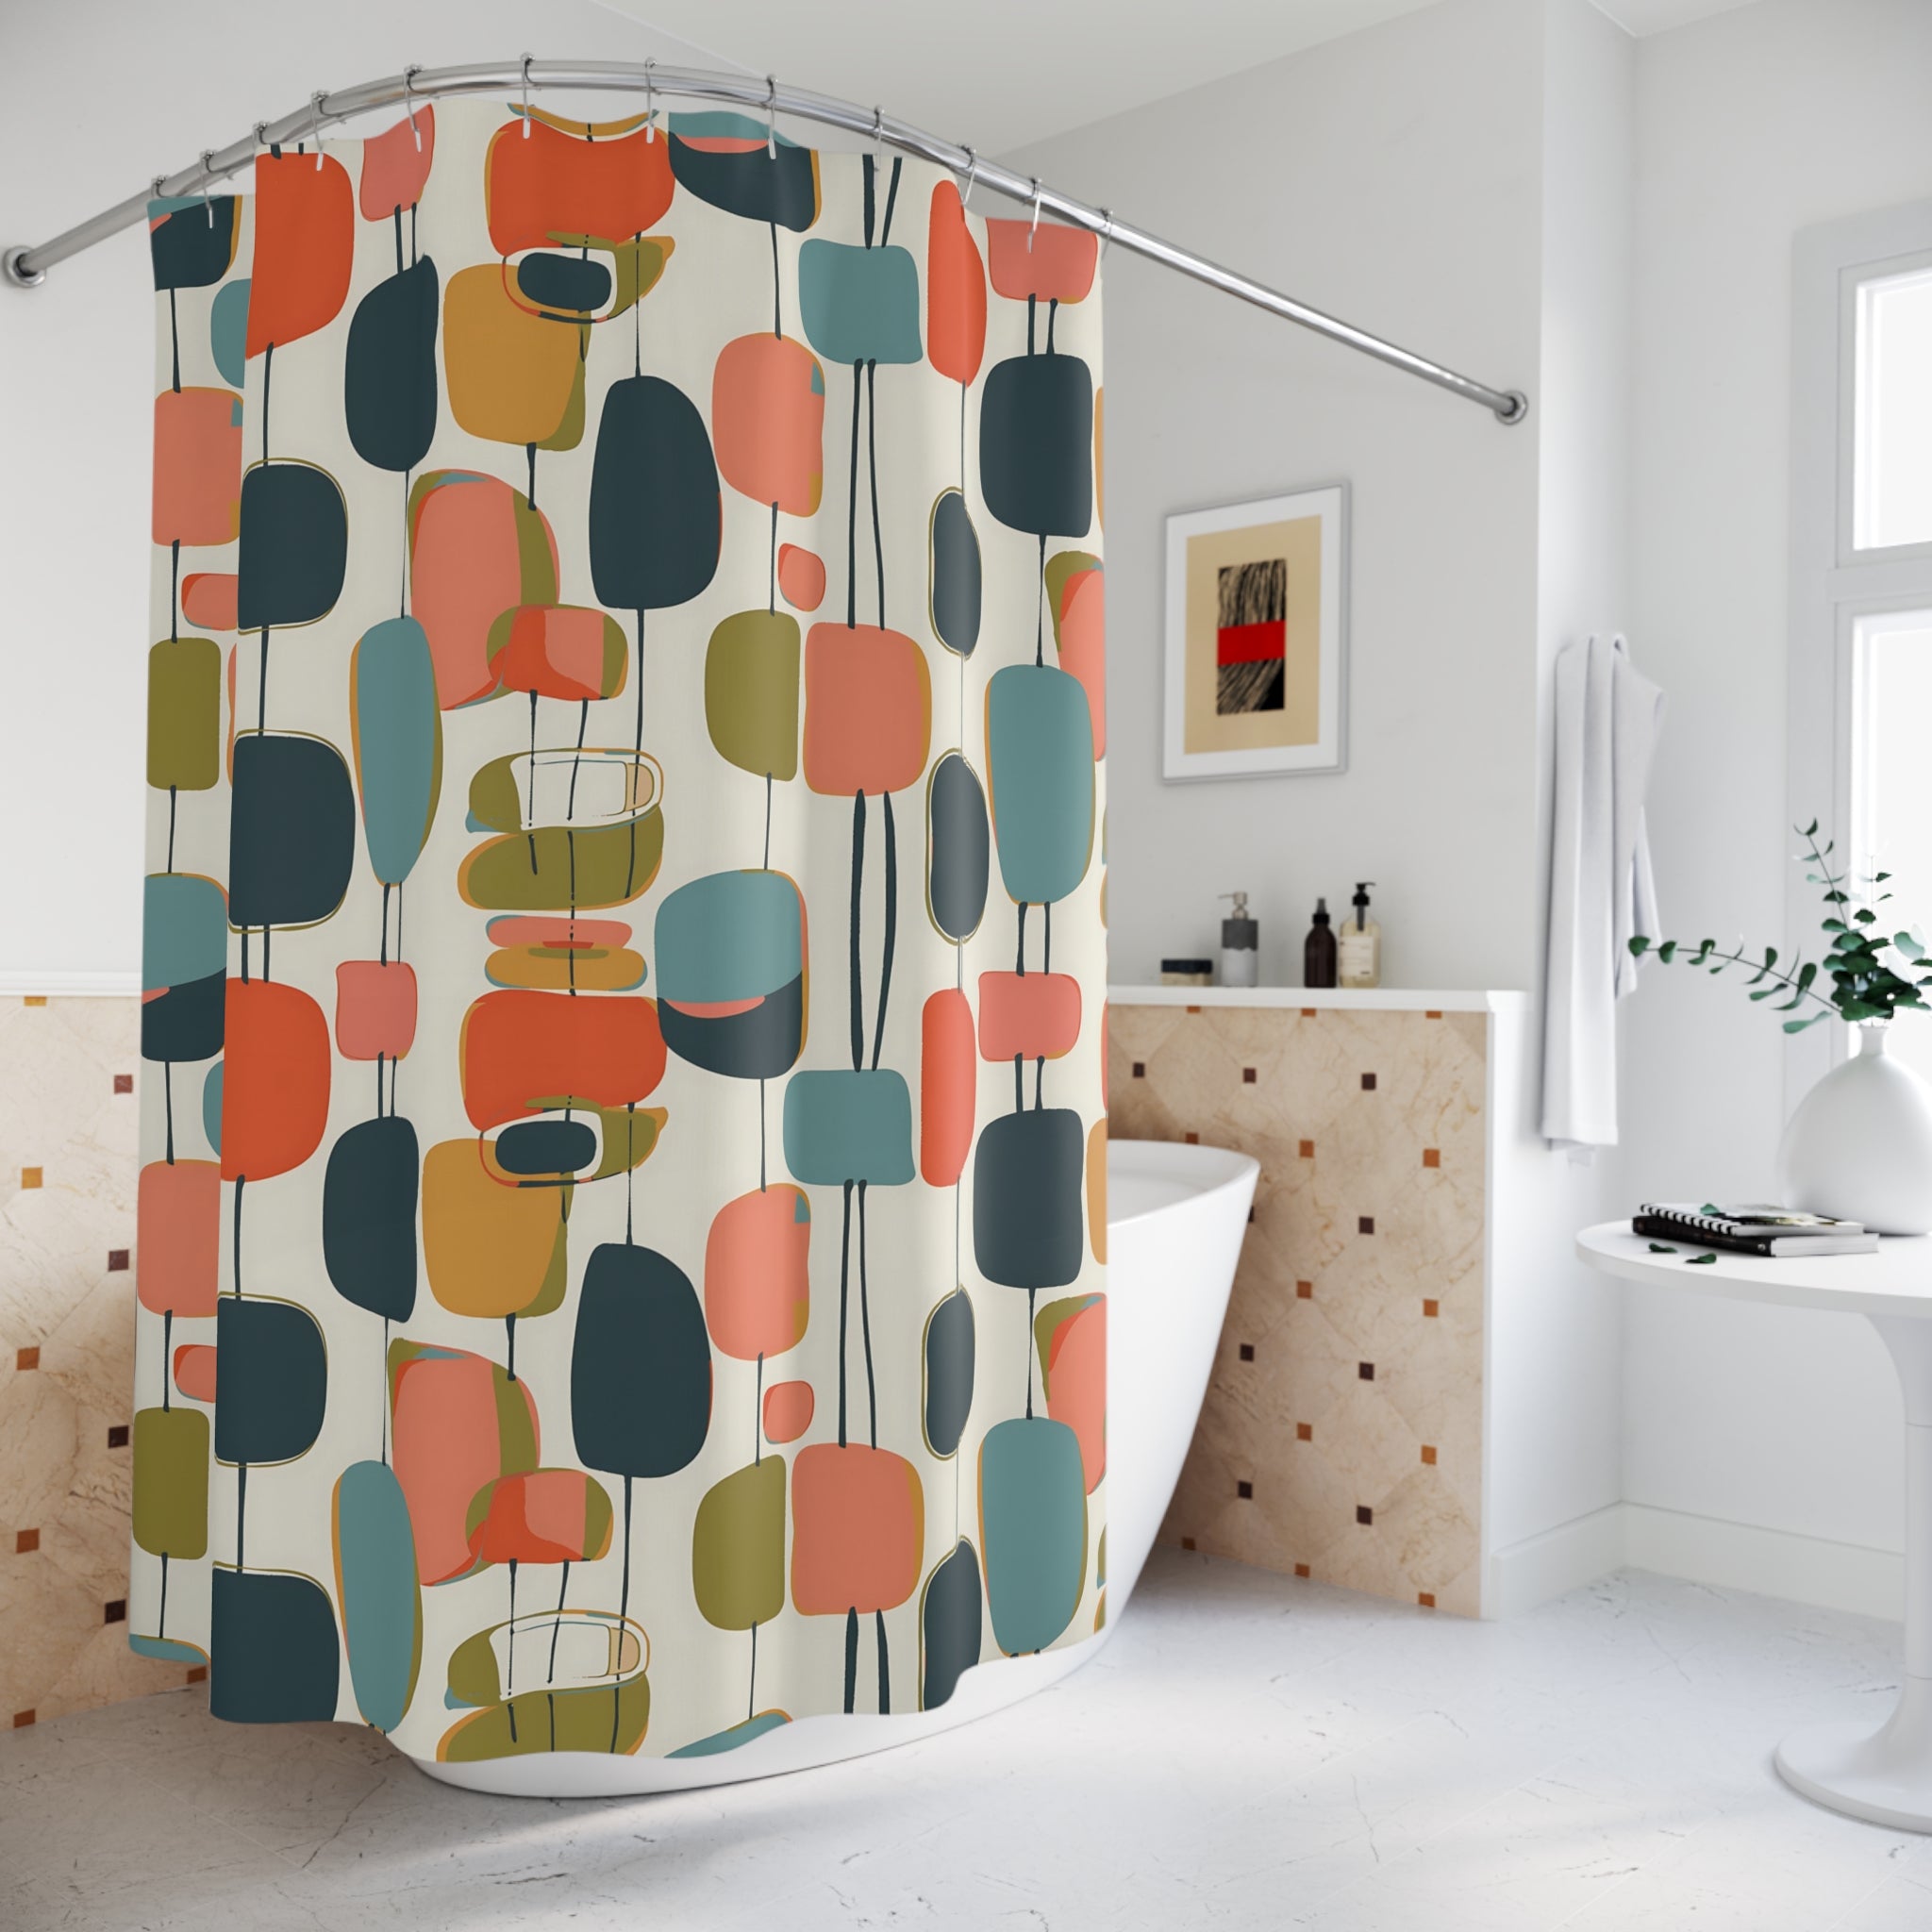 Mid Century Modern Shower Curtain, Abstracts, Geometric, MCM Teal, Orange, Aqua, Navy Blue Colorful Design Shower Curtain